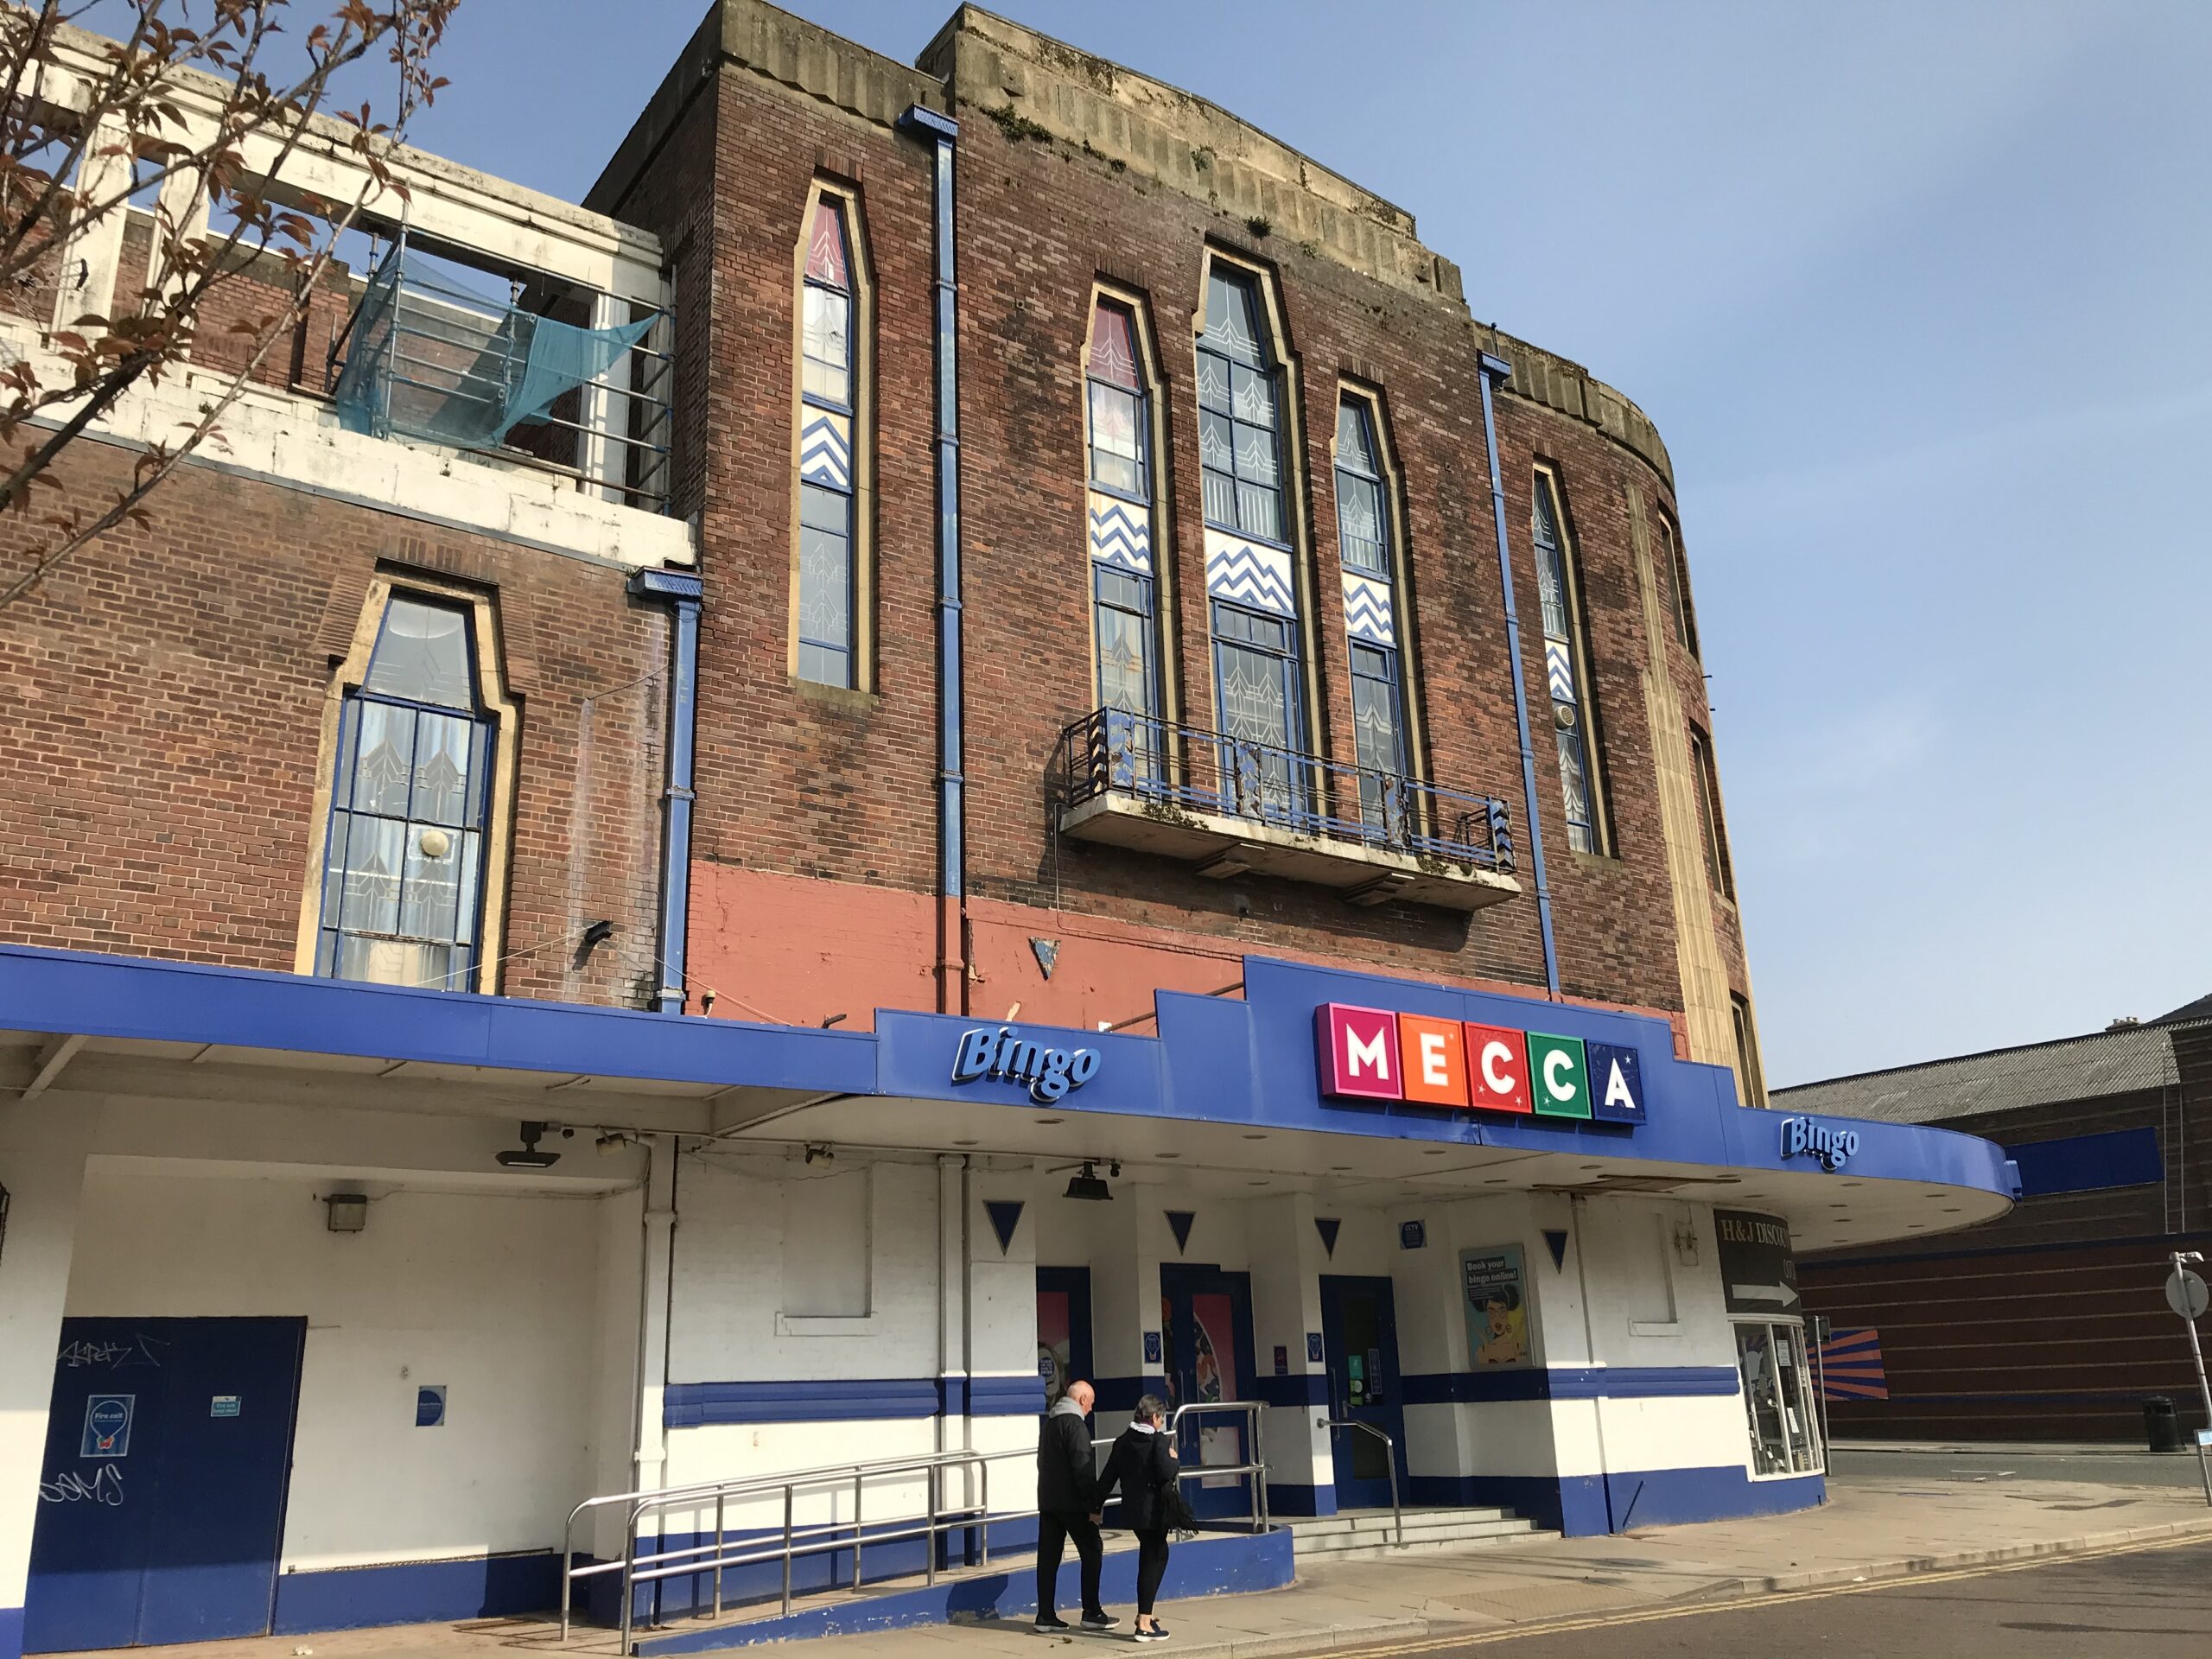 The former Garrick Theatre on Lord Street in Southport. Mecca Bingo has announced that it will not be reopening at the site. Photo by Andrew Brown Media